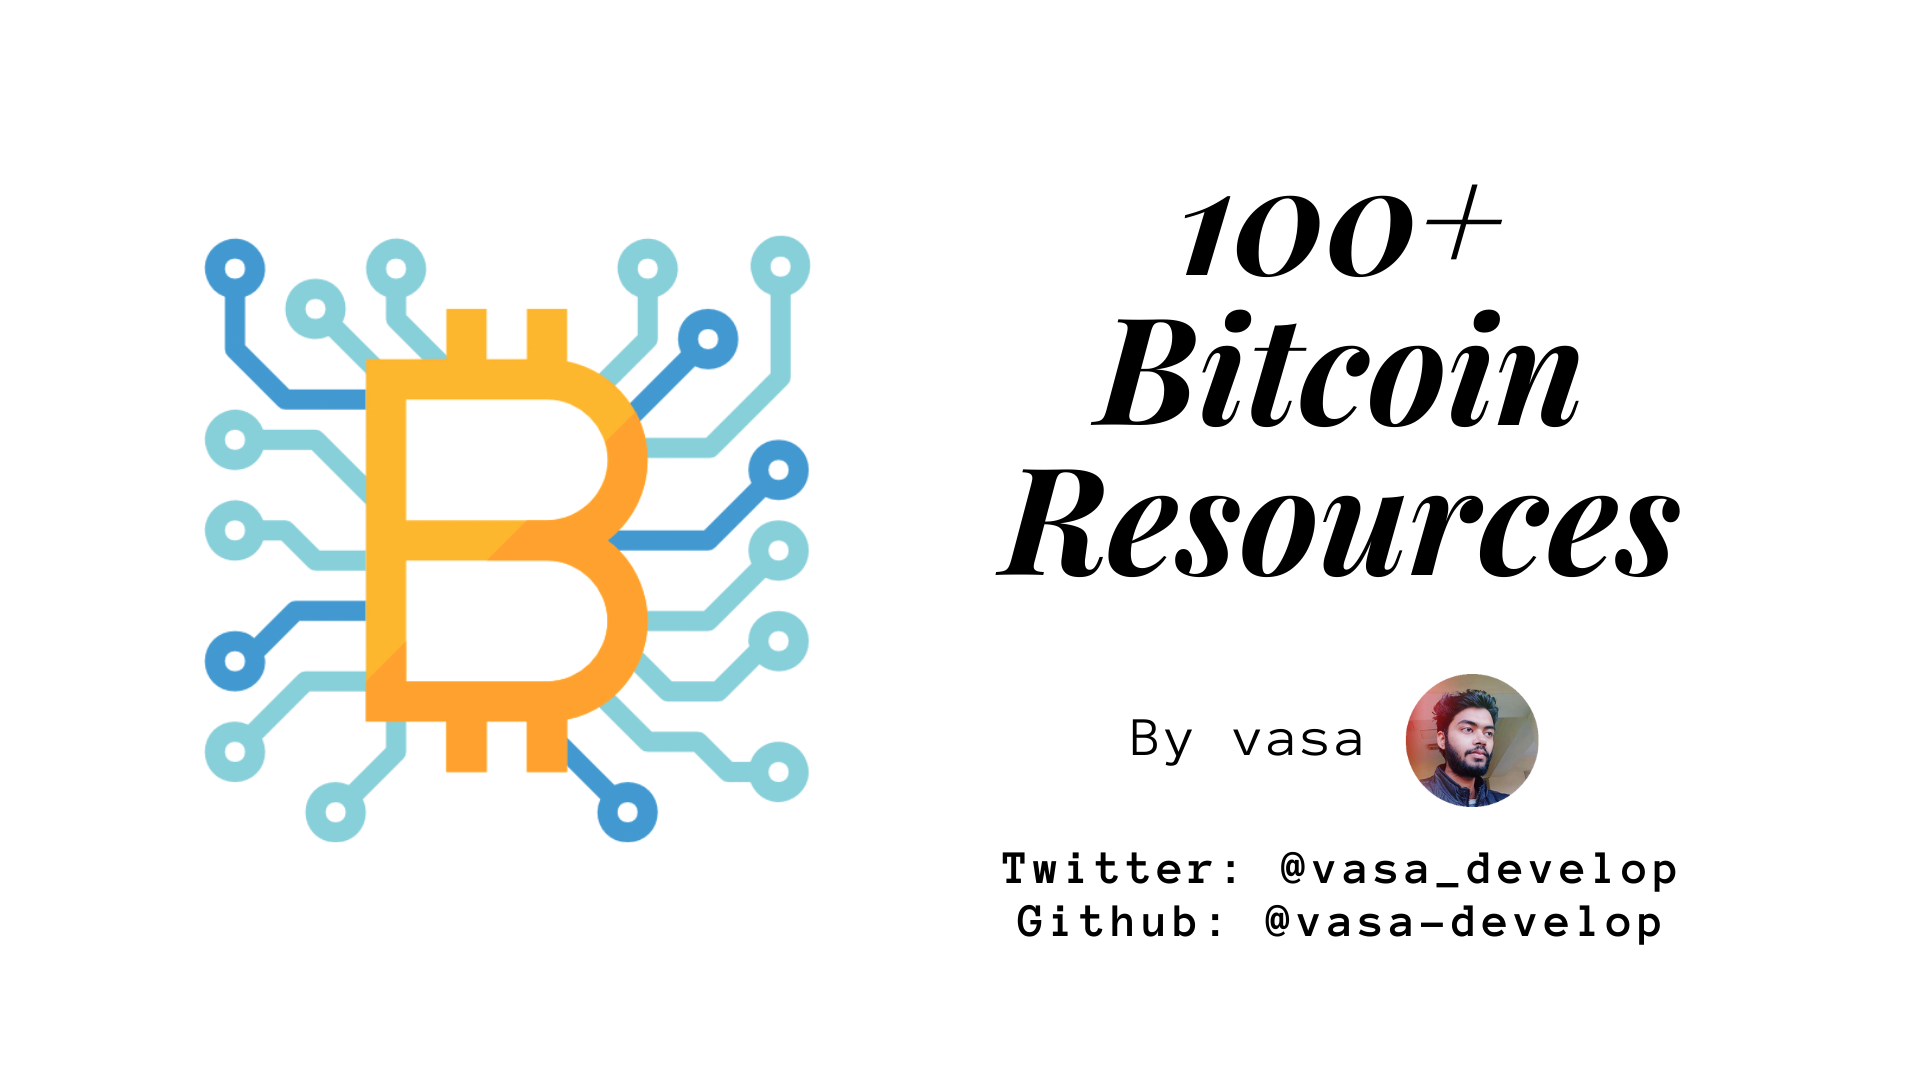 100+ Bitcoin Resources